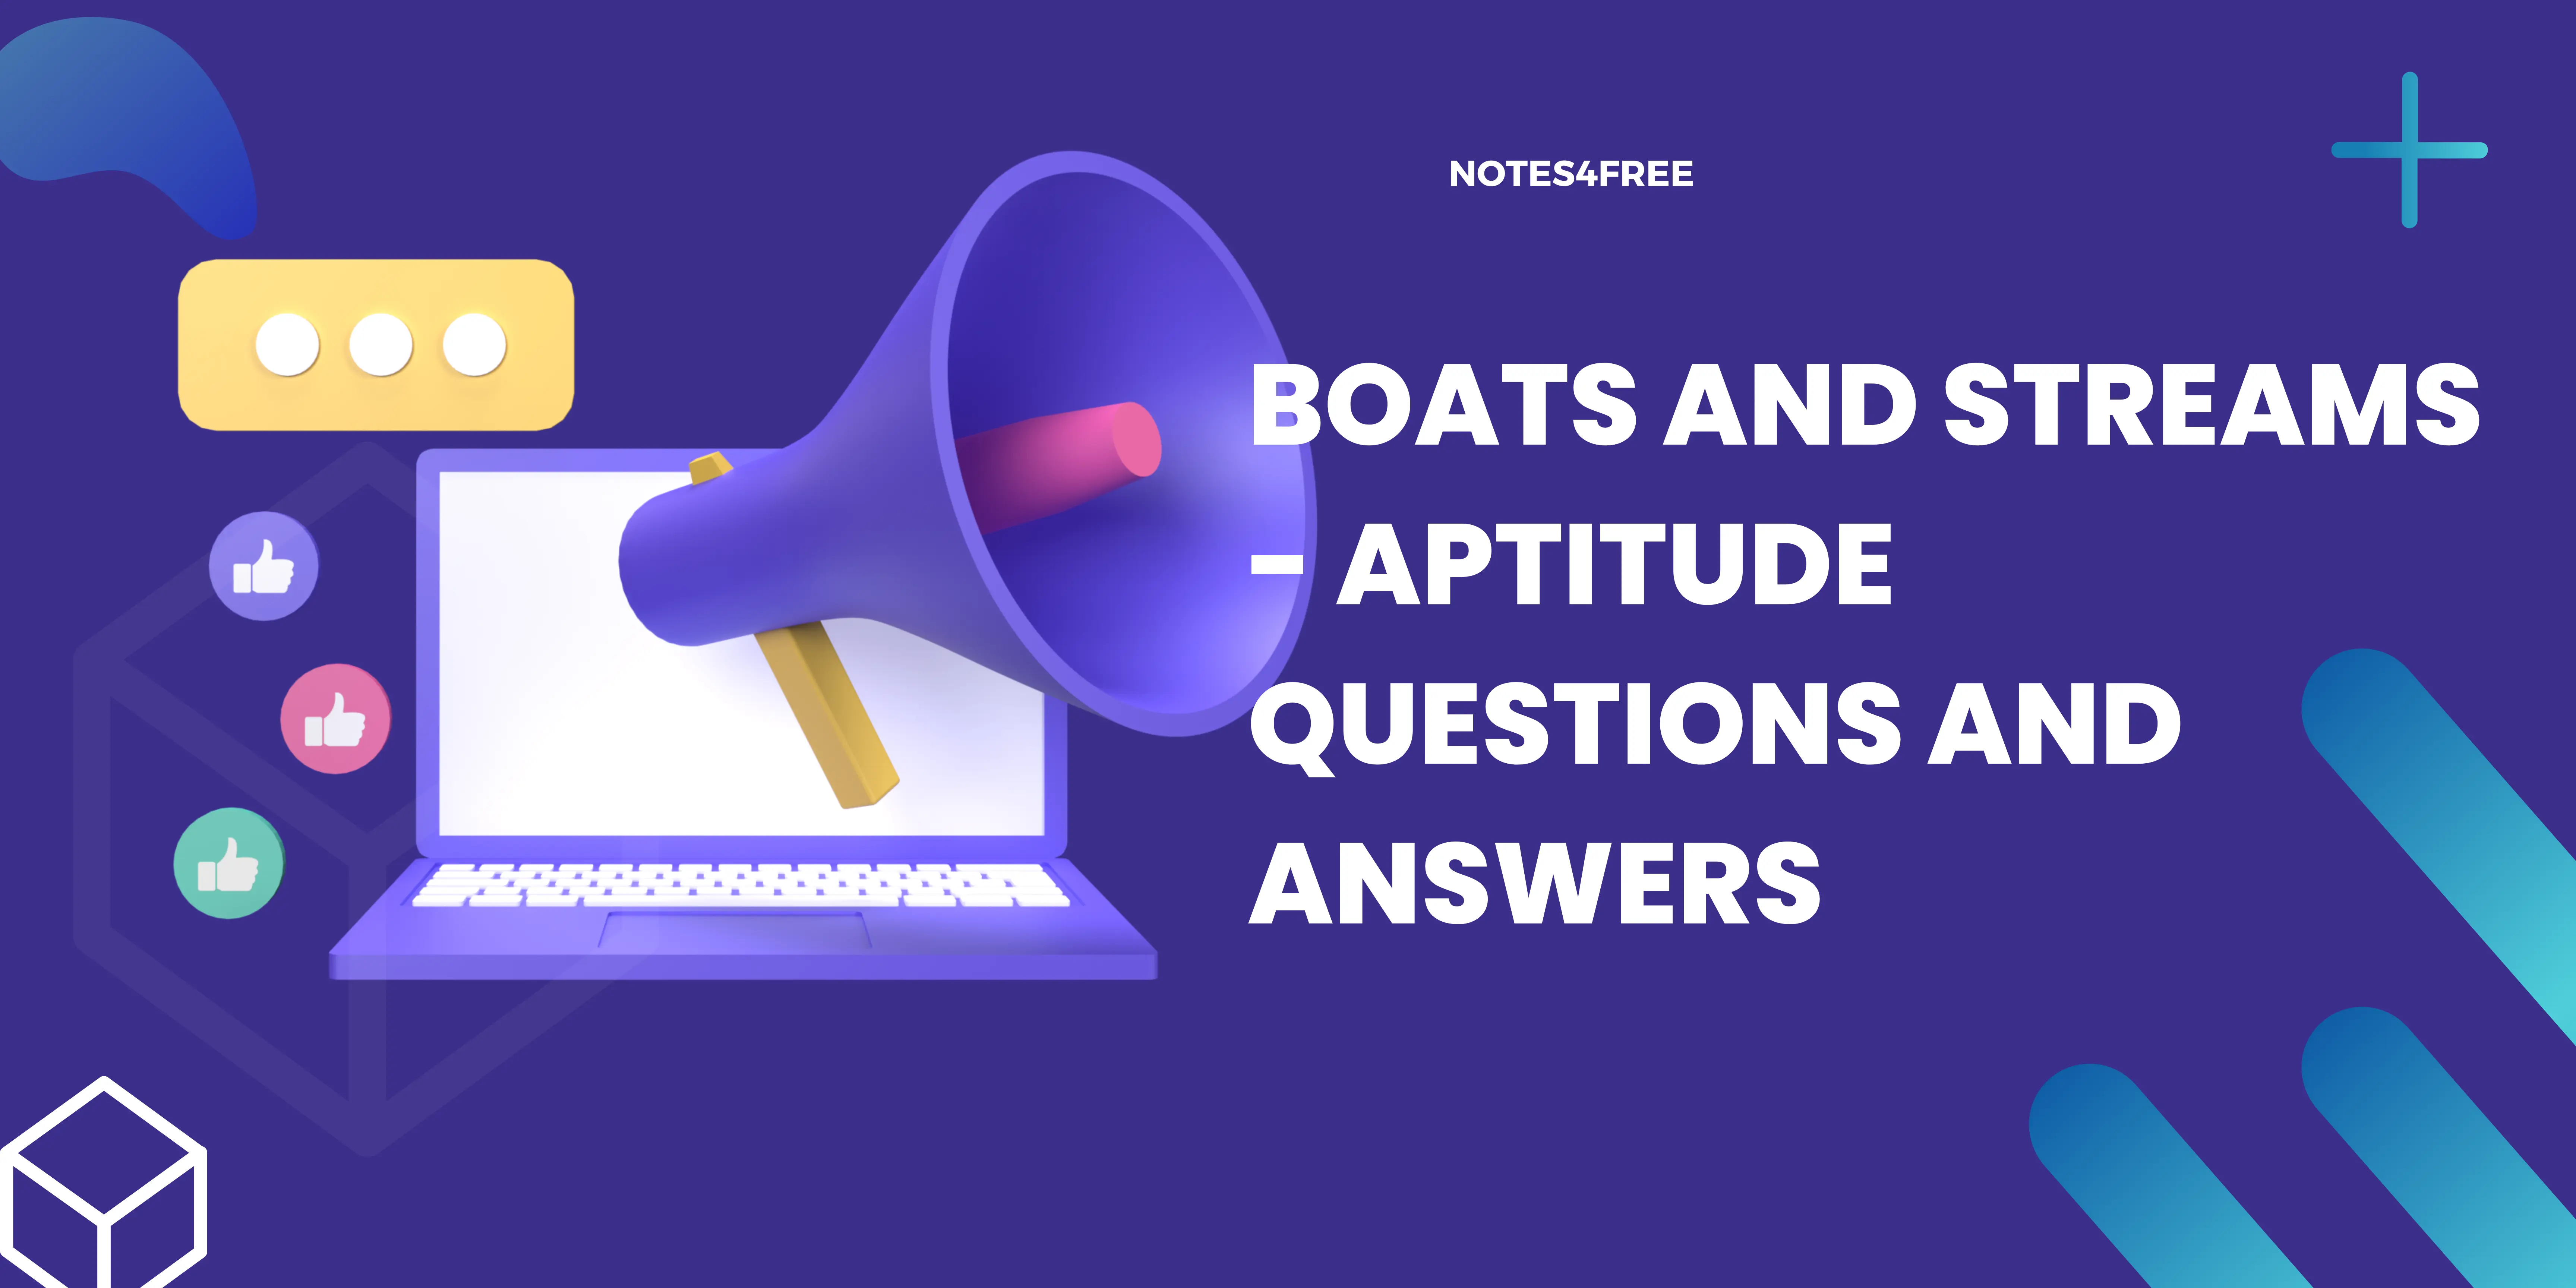 Boats and Streams - Aptitude Questions and Answers